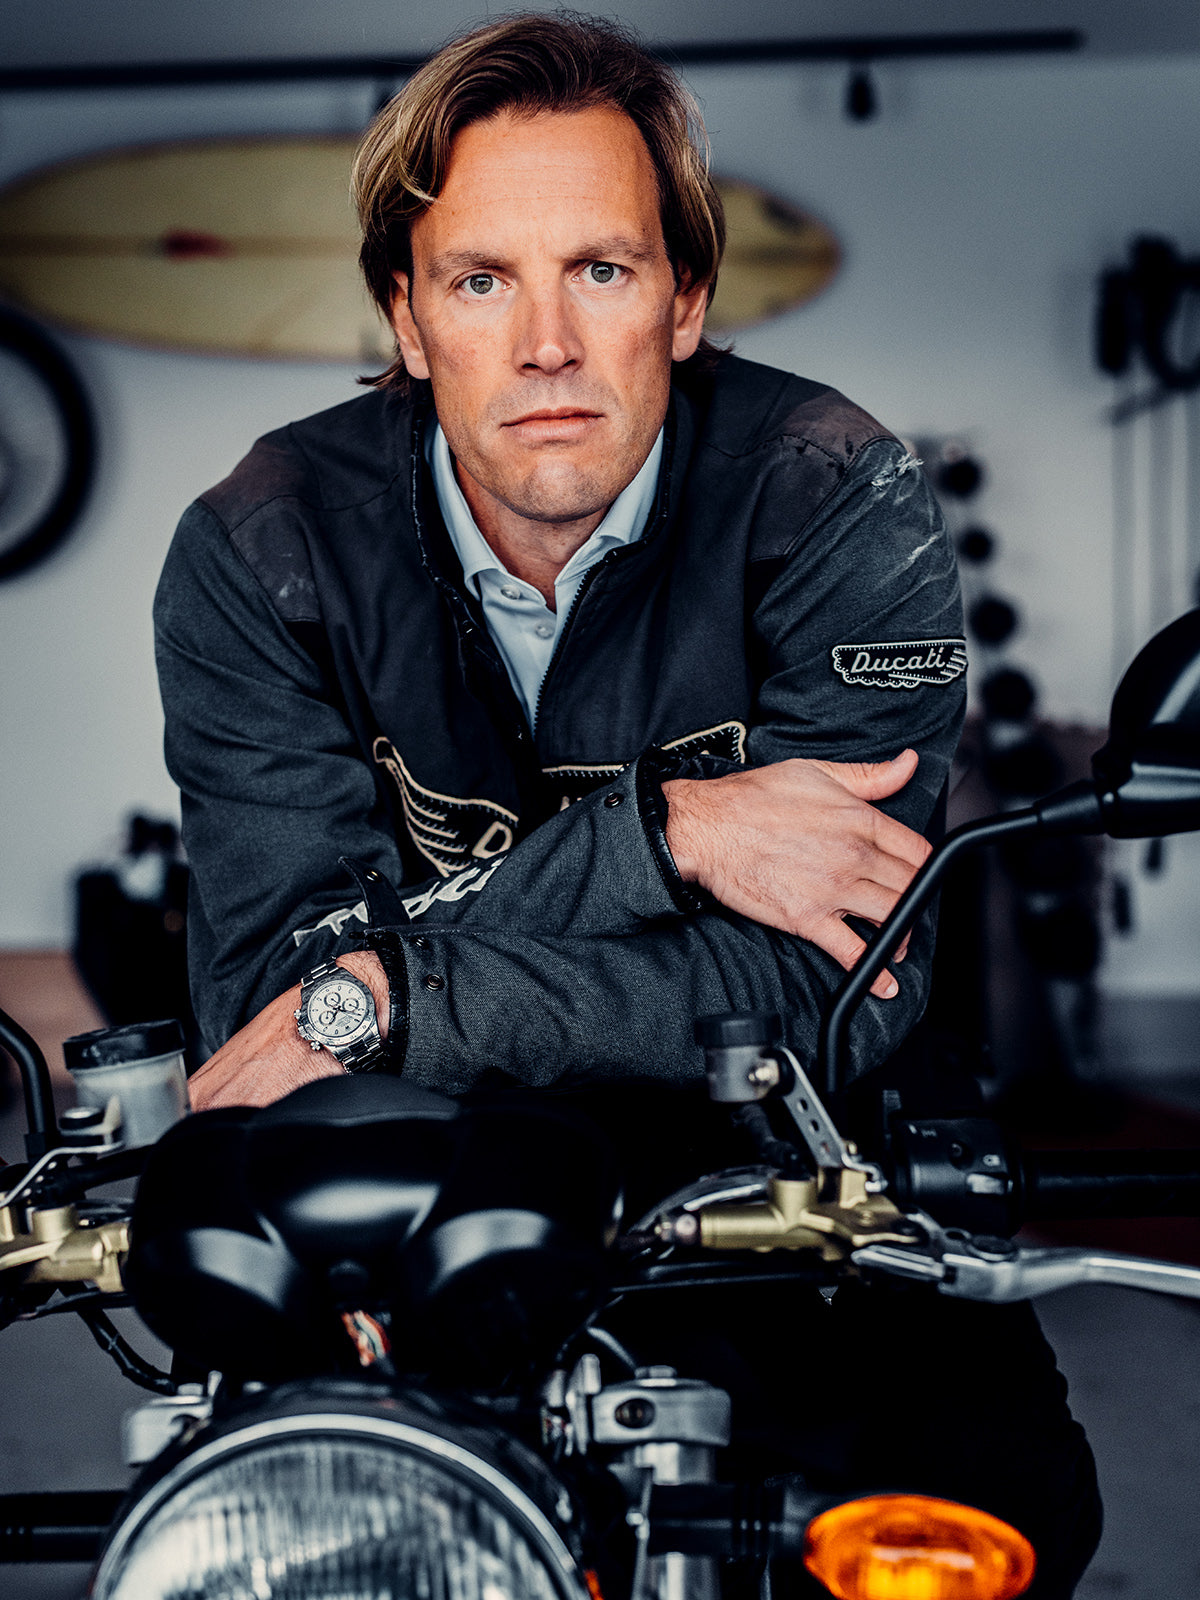 TC Høiseth on motorcycle in barons business shirt